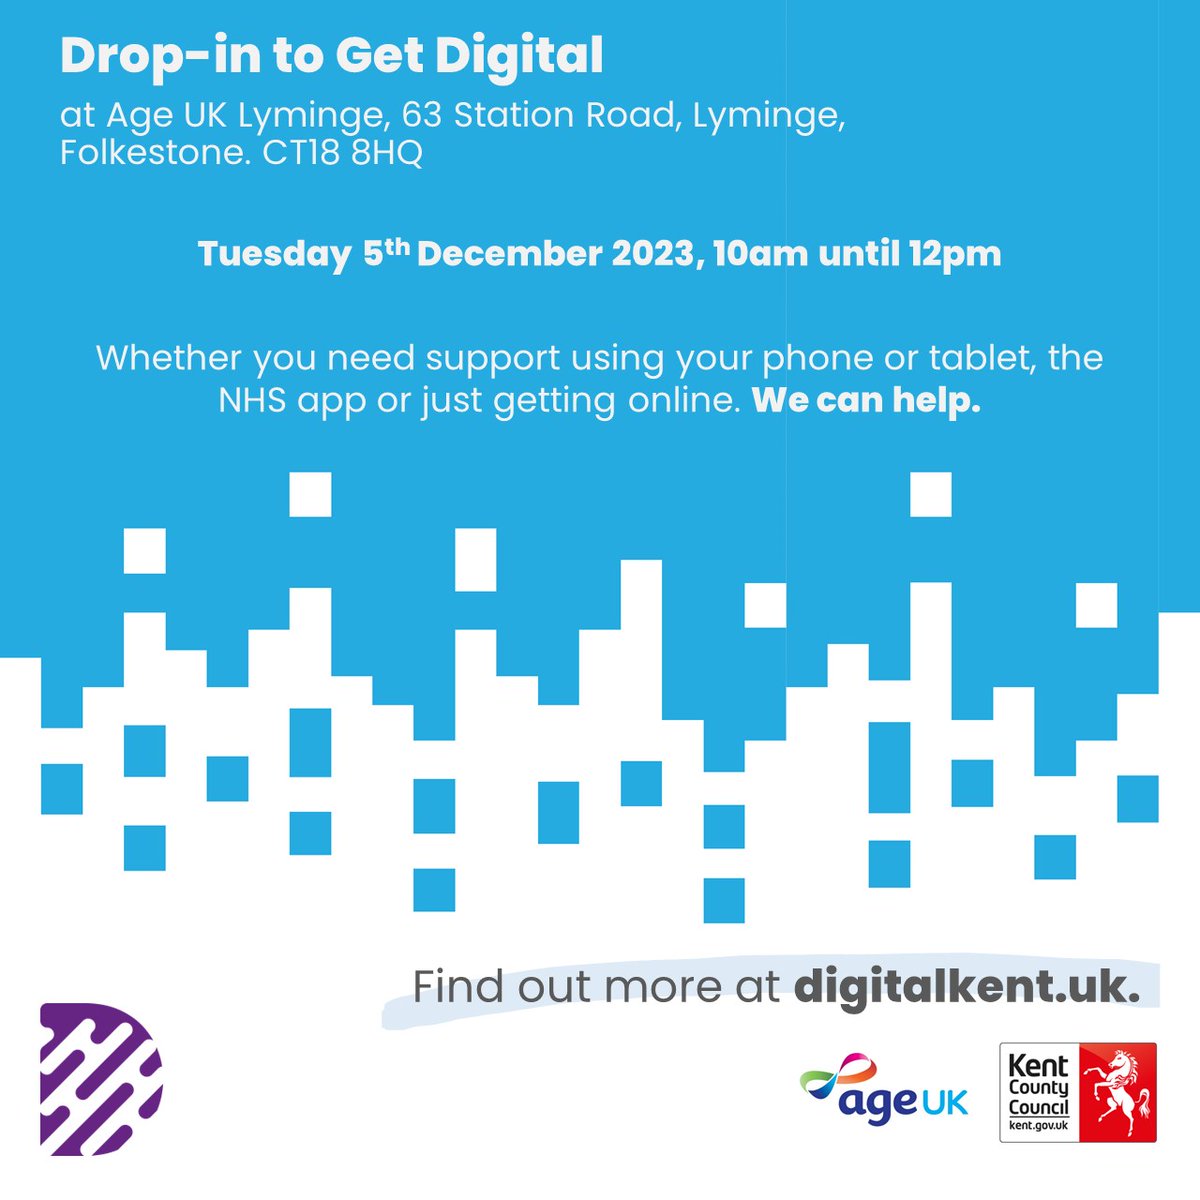 Come along or let your loved ones know of our Drop-in Get Digital session, helping with all things to do with your phones, Ipads and tablets.
#digitalsupport
#ageuklyminge